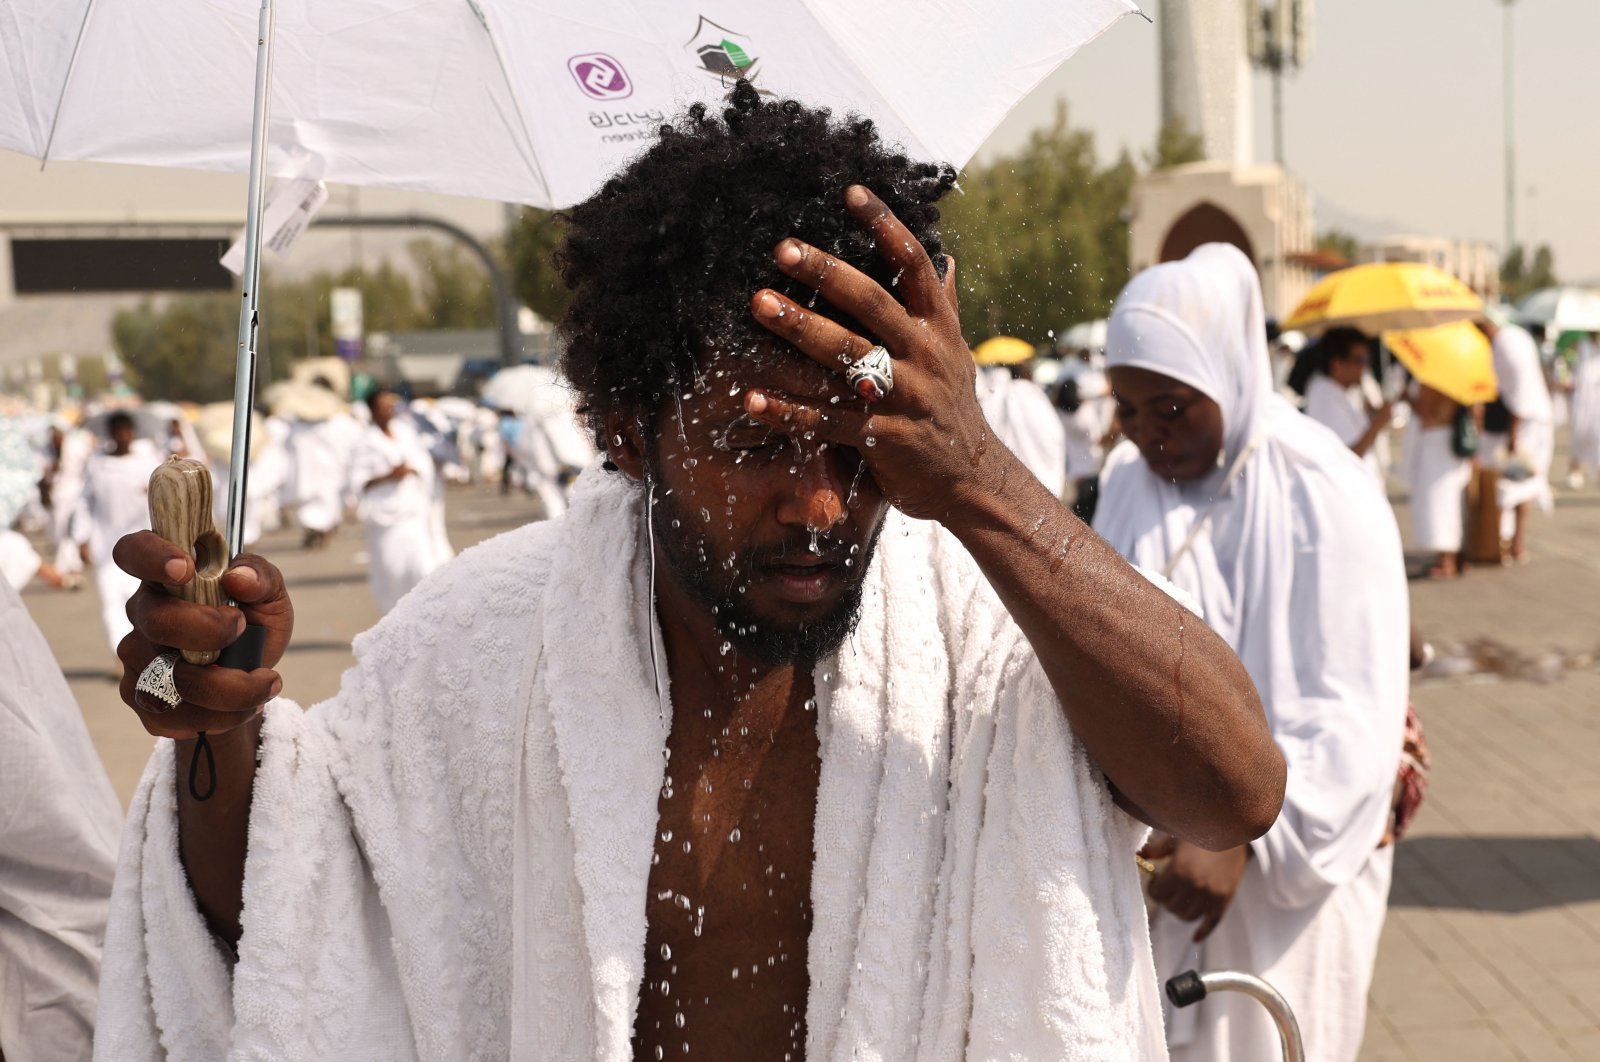 A Muslim pilgrim splashes water on his head to cool off at the base of Mount Arafat during the Hajj pilgrimage in Saudi Arabia, June 15, 2024. (AFP Photo)